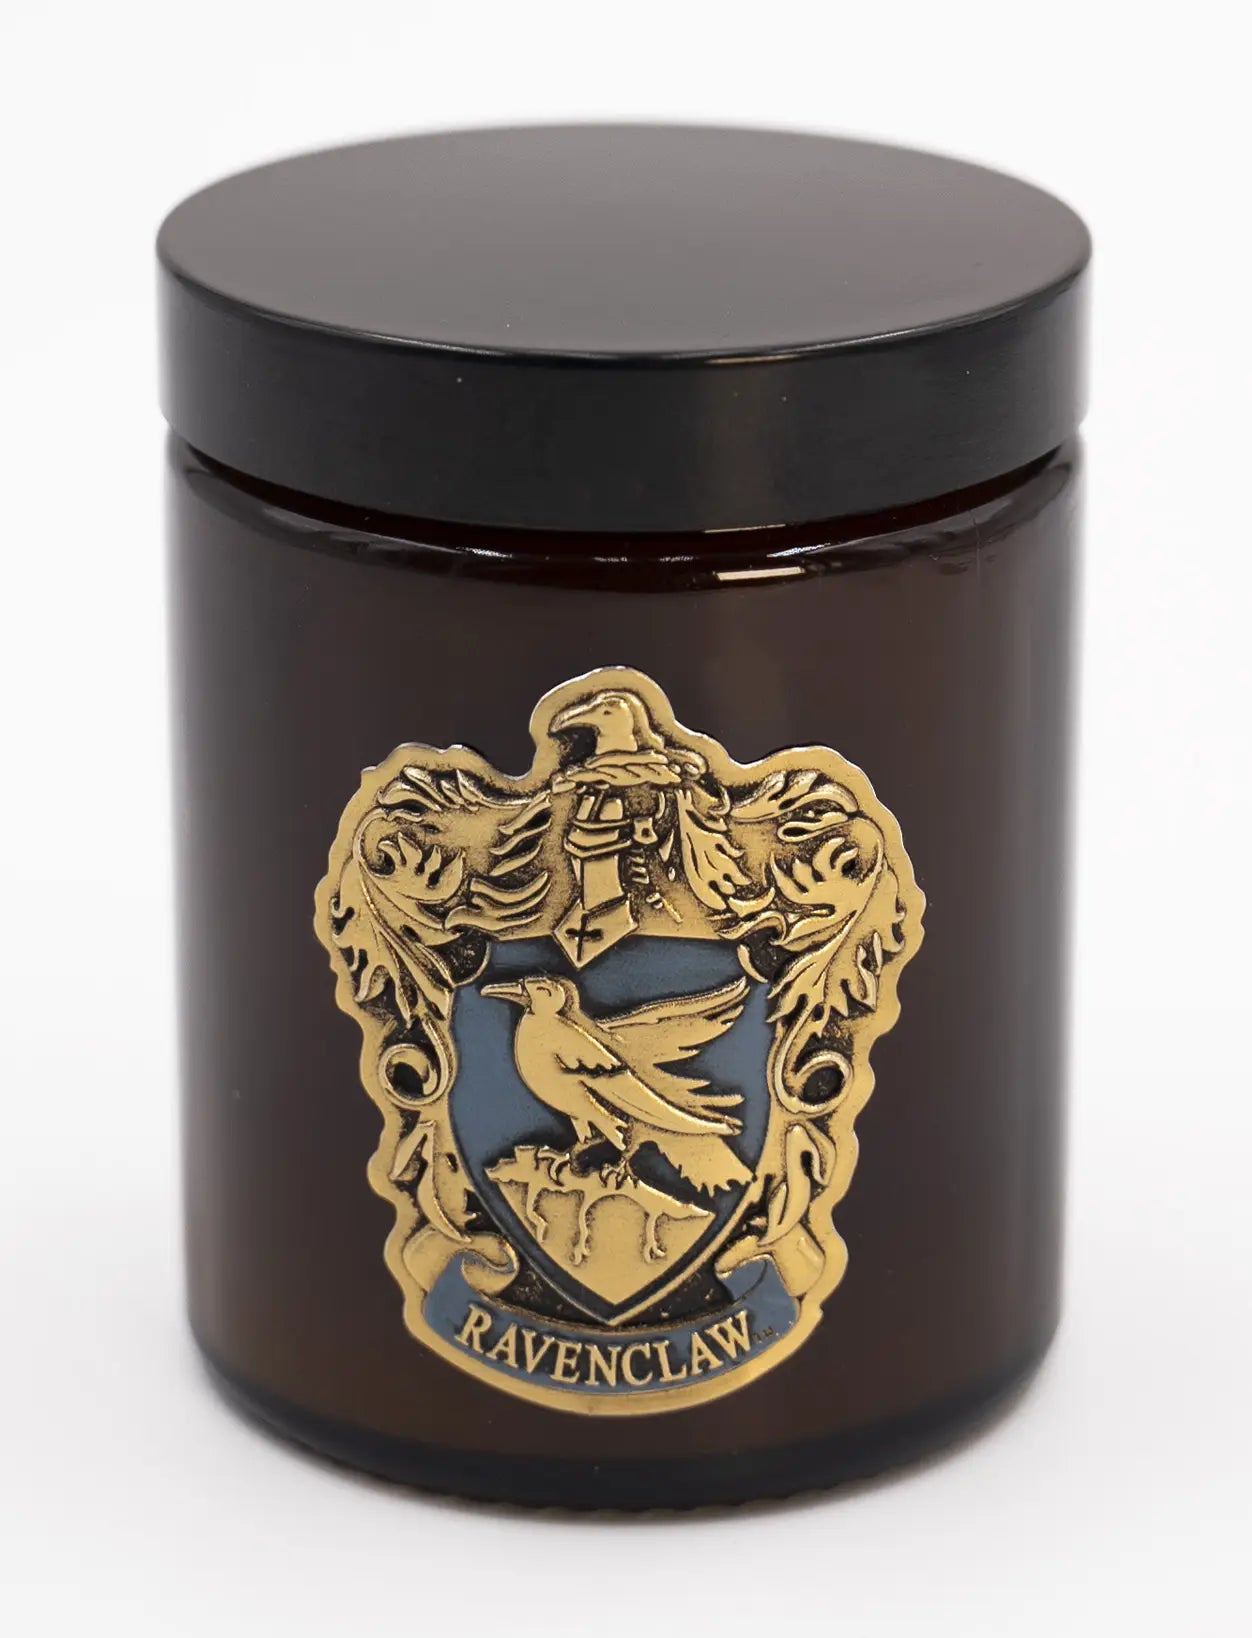 HARRY POTTER SCENTED CANDLE - RAVENCLAW (RAVENCLAW)